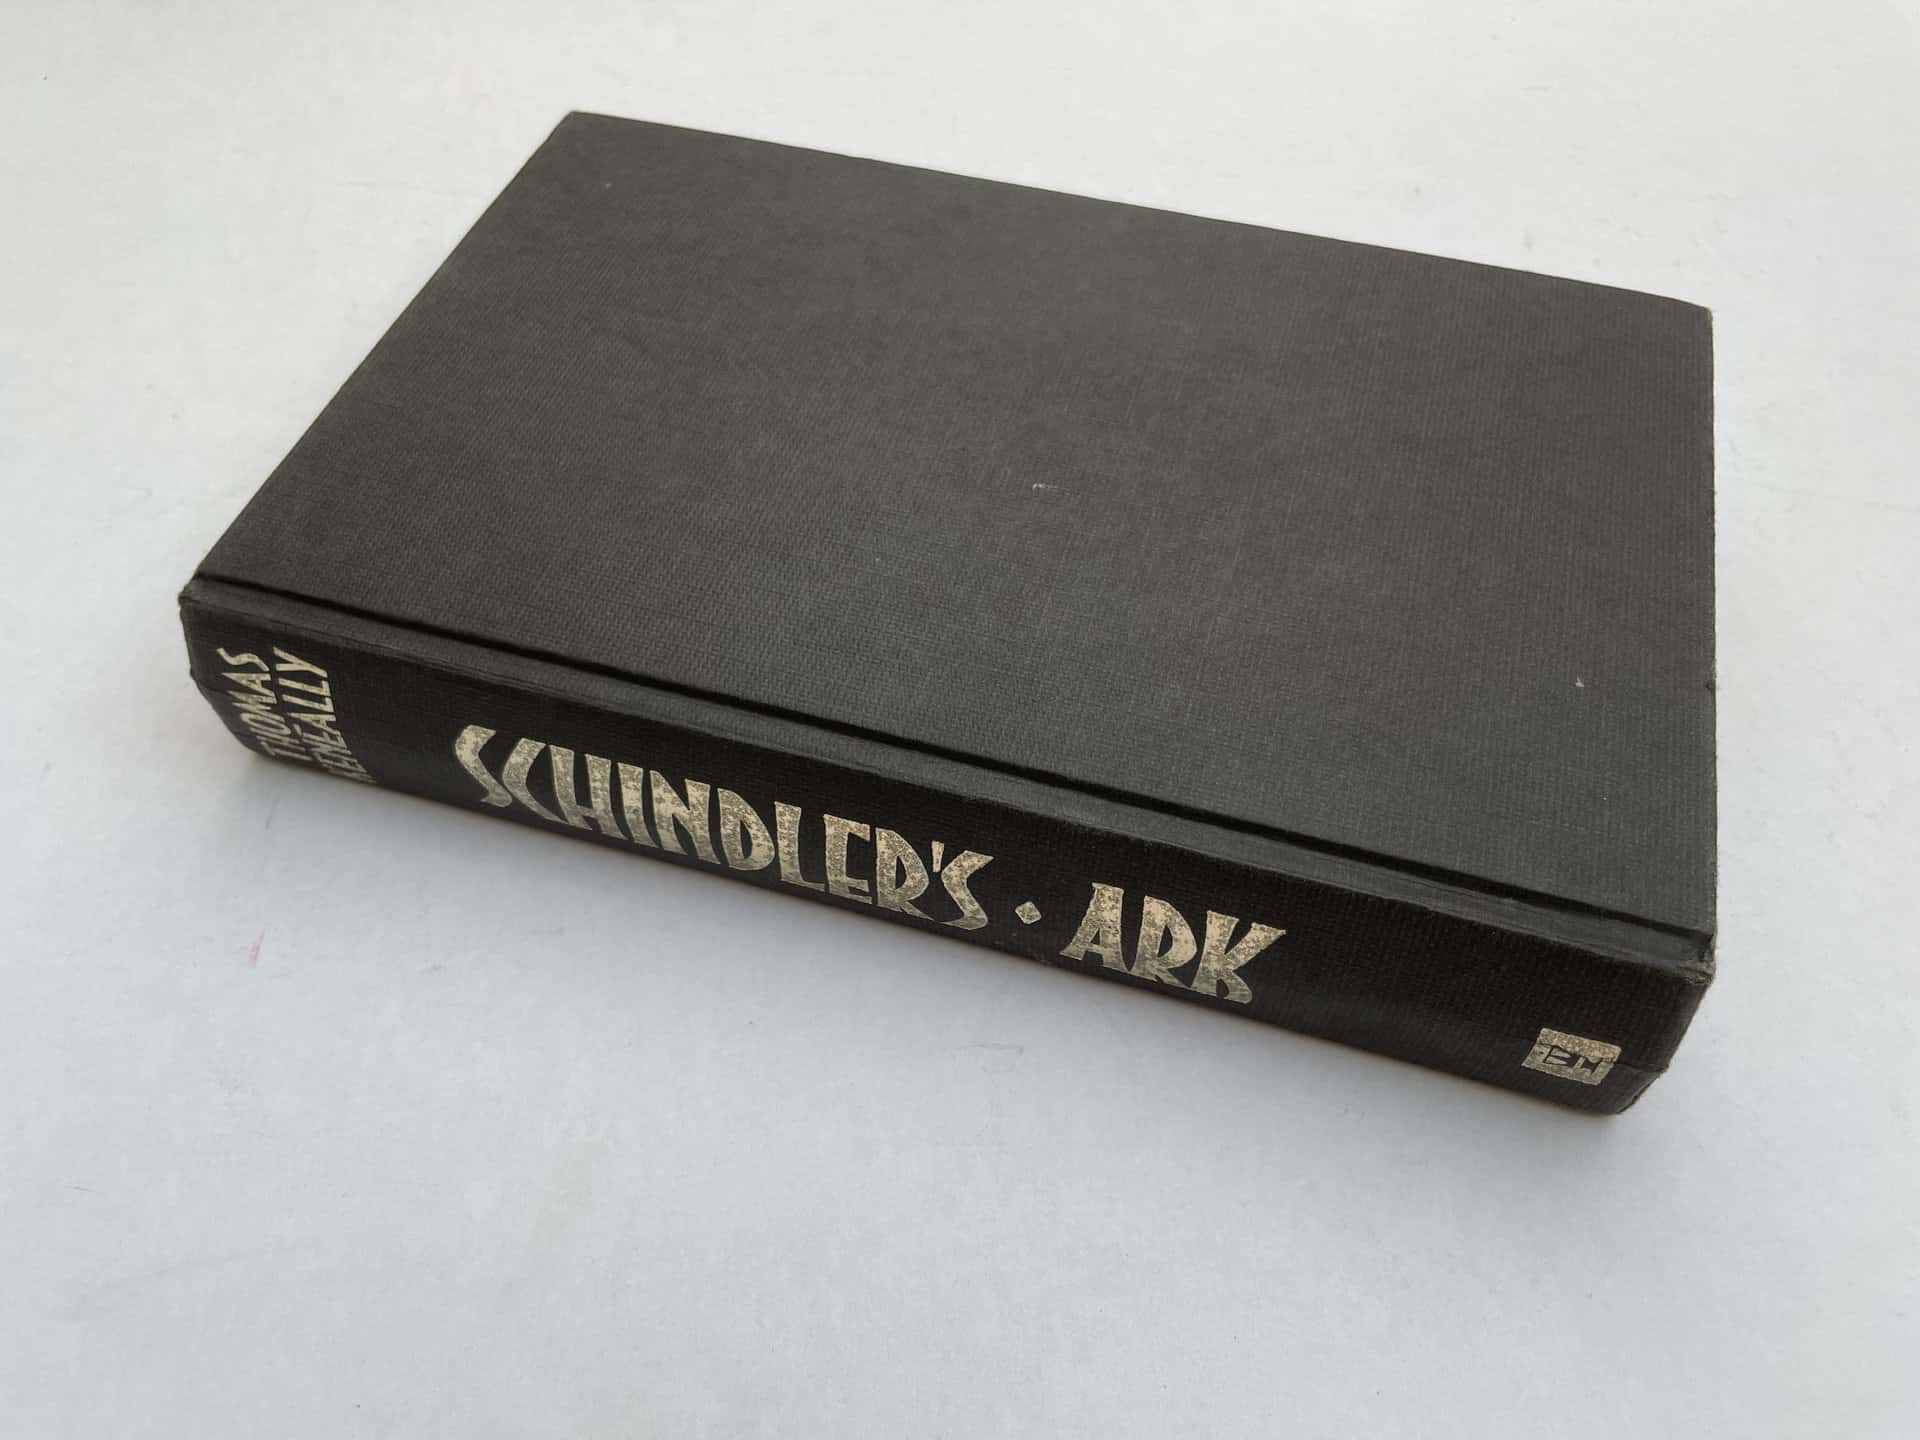 thomas keneally schindlers ark first edition3 1